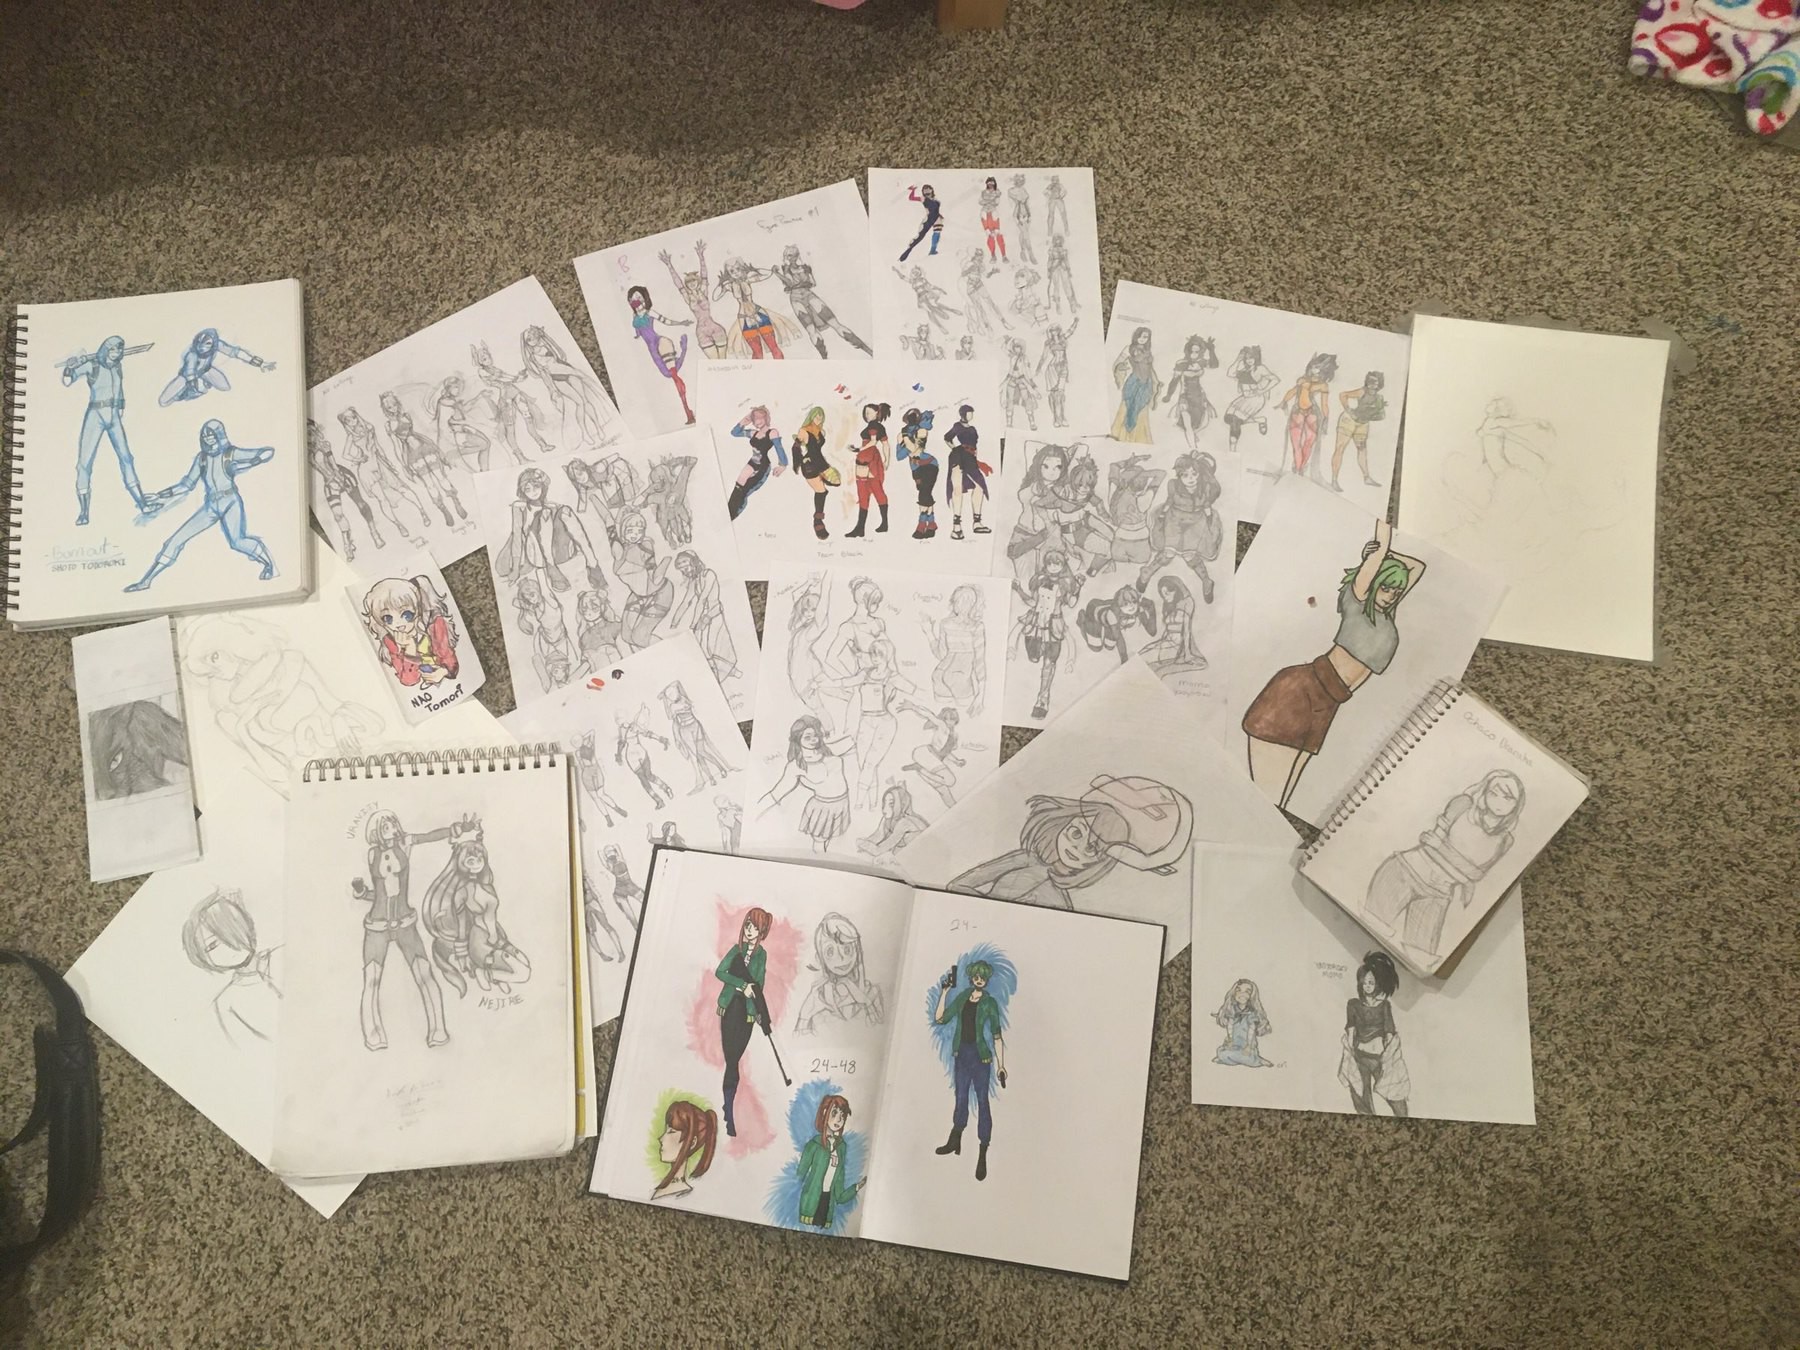 Many pages of sketches and colorings laid out on the floor